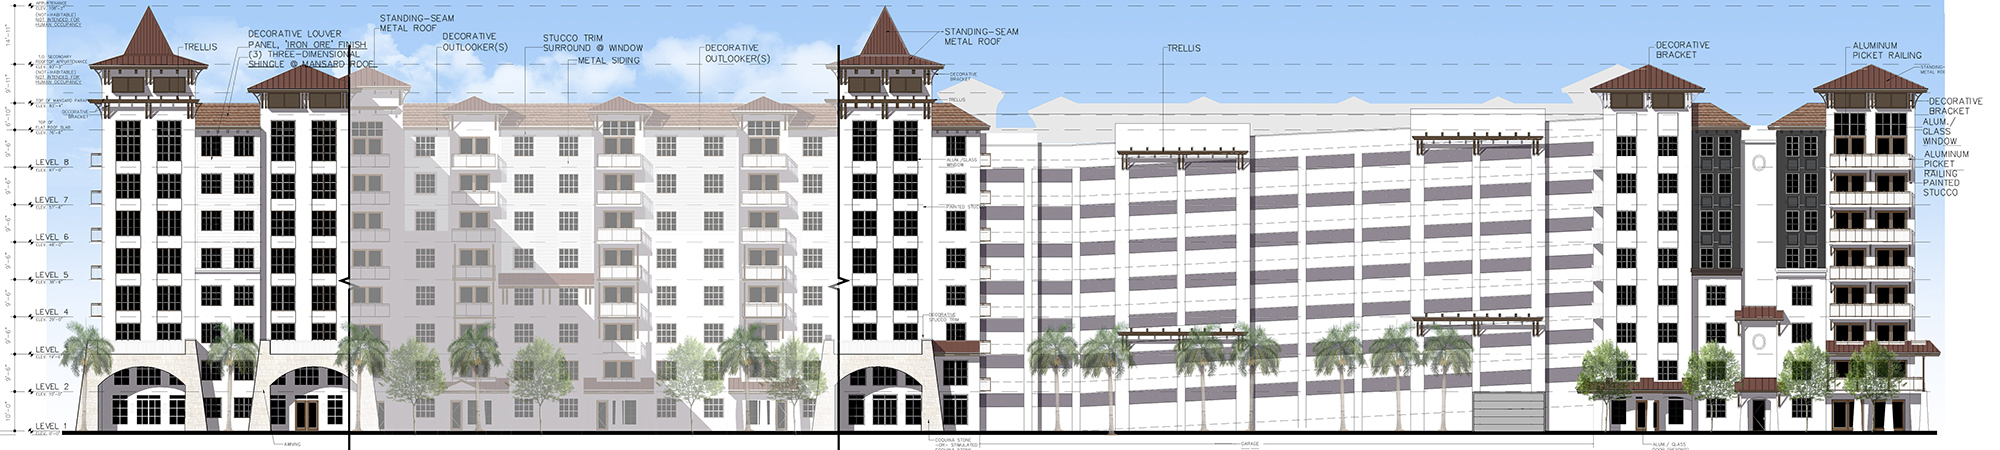 The west elevation of RD River City Brewery apartments.